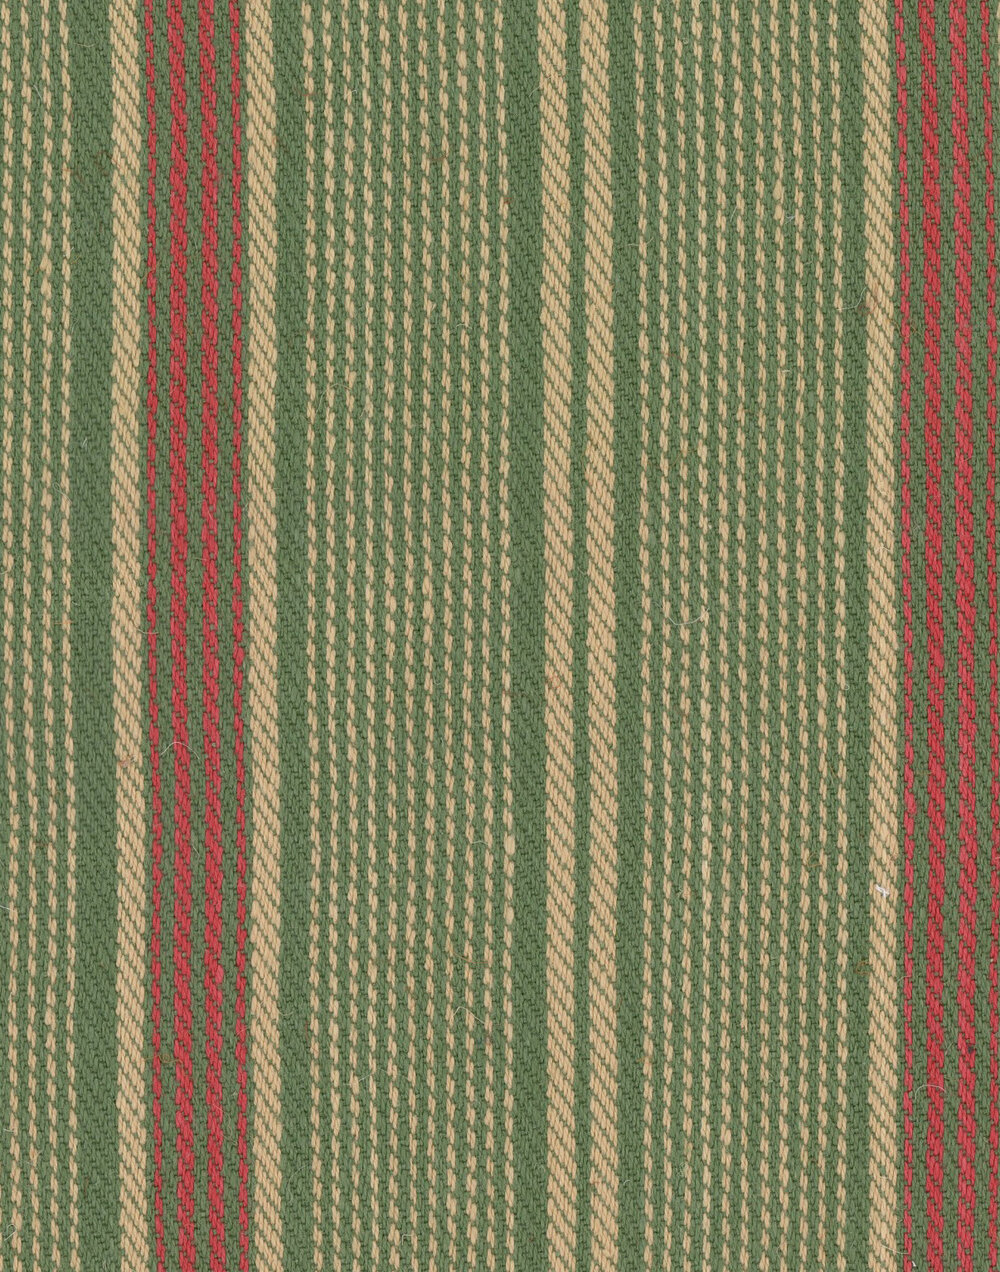 Tyrolean Stripes Fabric - Green/ Red/ Taupe - by Mind the Gap